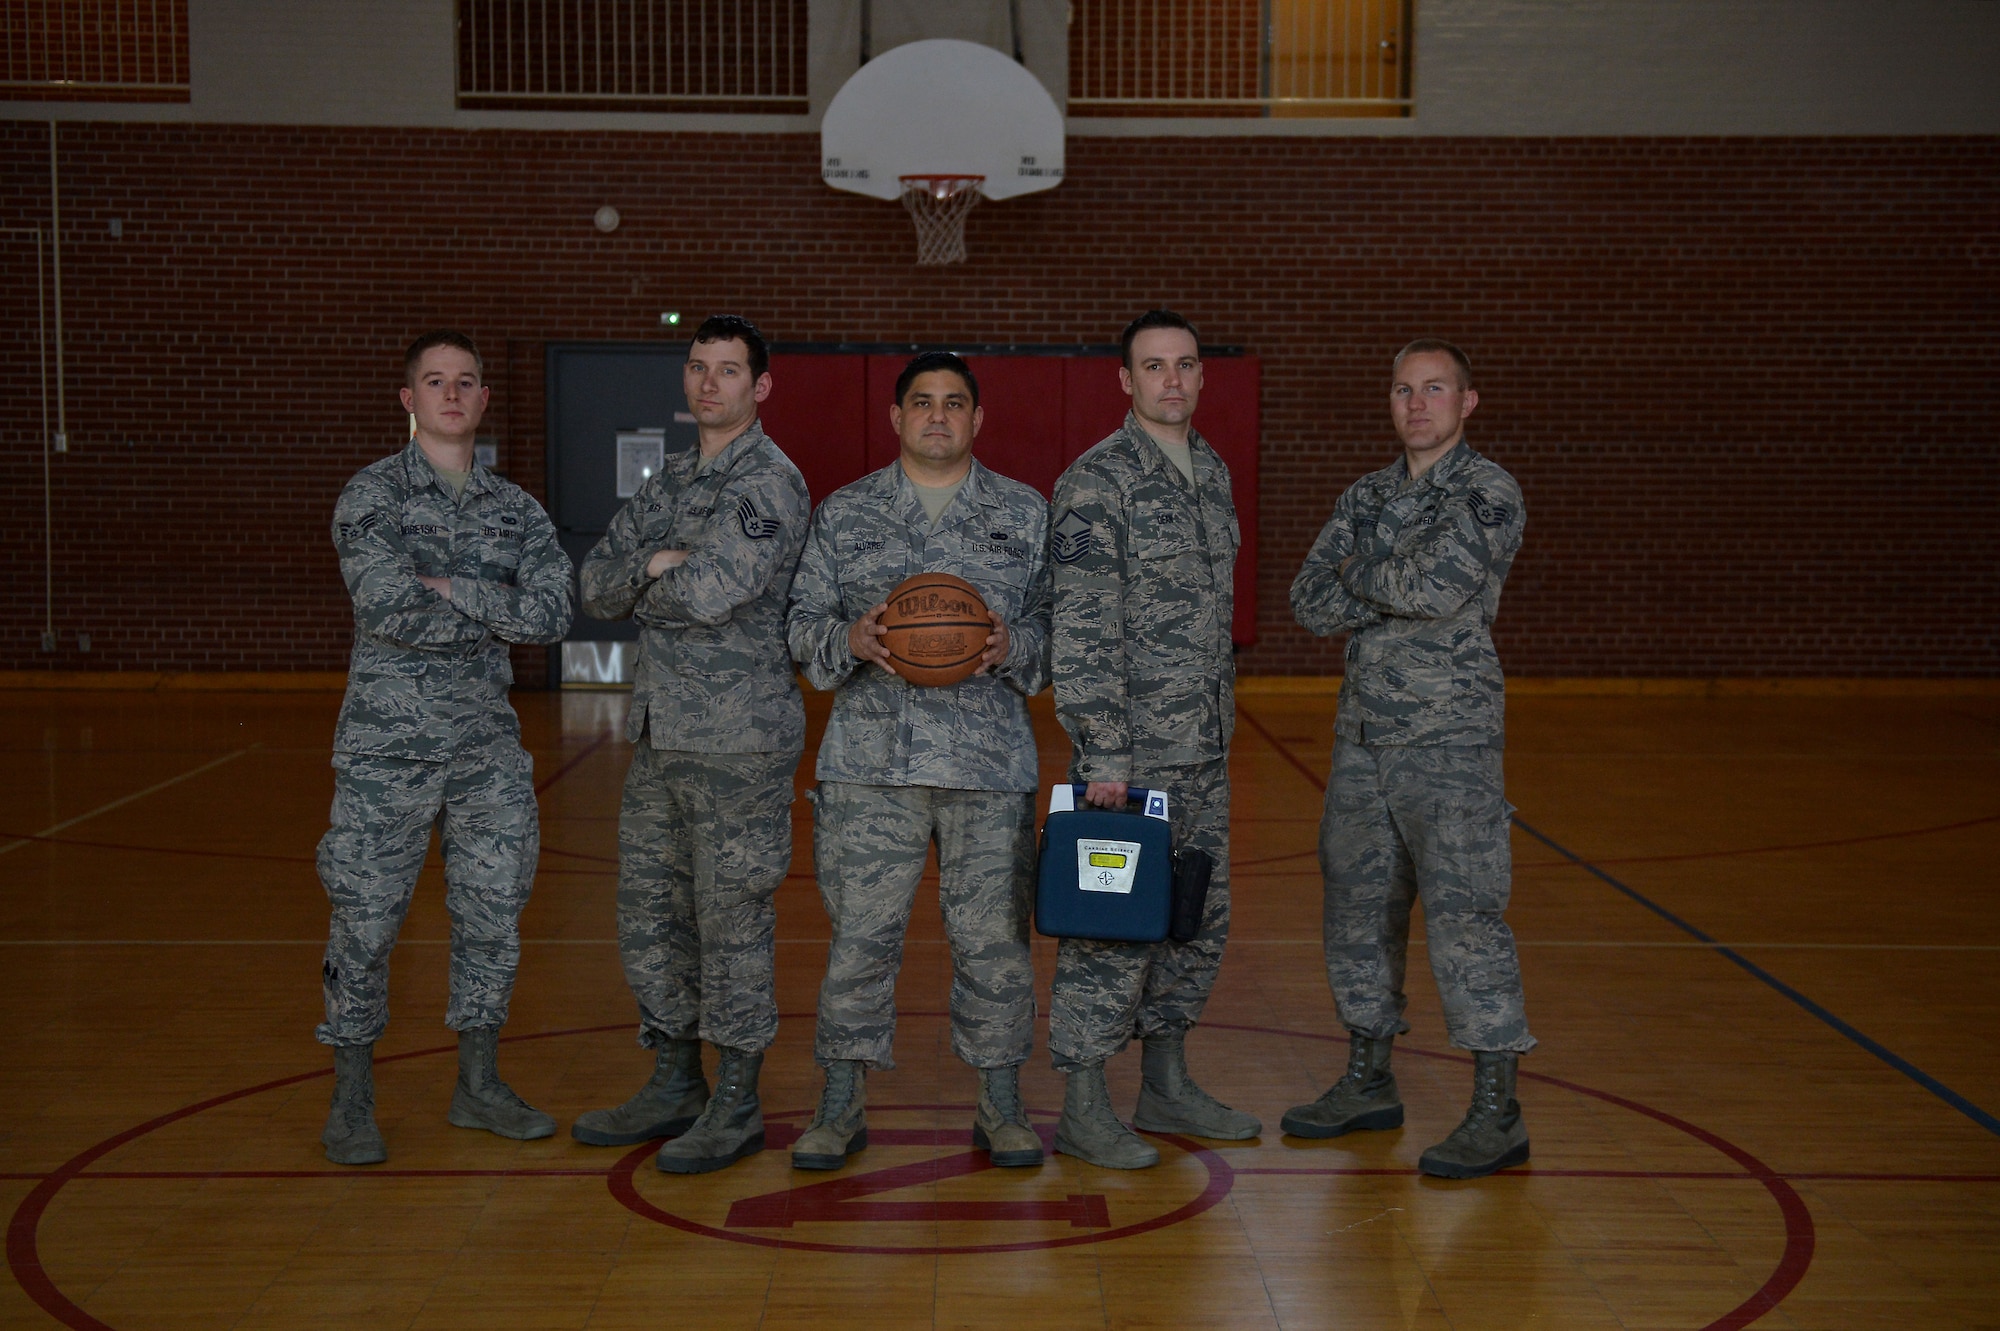 Senior Airman Jonathan Sobetski, Staff Sgt. Matthew Riley, Tech. Sgt. Michael Alvarez, Master Sgt. Jeremy Dean and Staff Sgt. Dan Schieffer pose on the basketball court right where the incident happened, April 17, 2018, at the Spirit of '76 Armory Lincoln, Nebraska. 
(U.S. Air Force photo taken by Senior Master Sgt. Shannon Nielsen/Released)